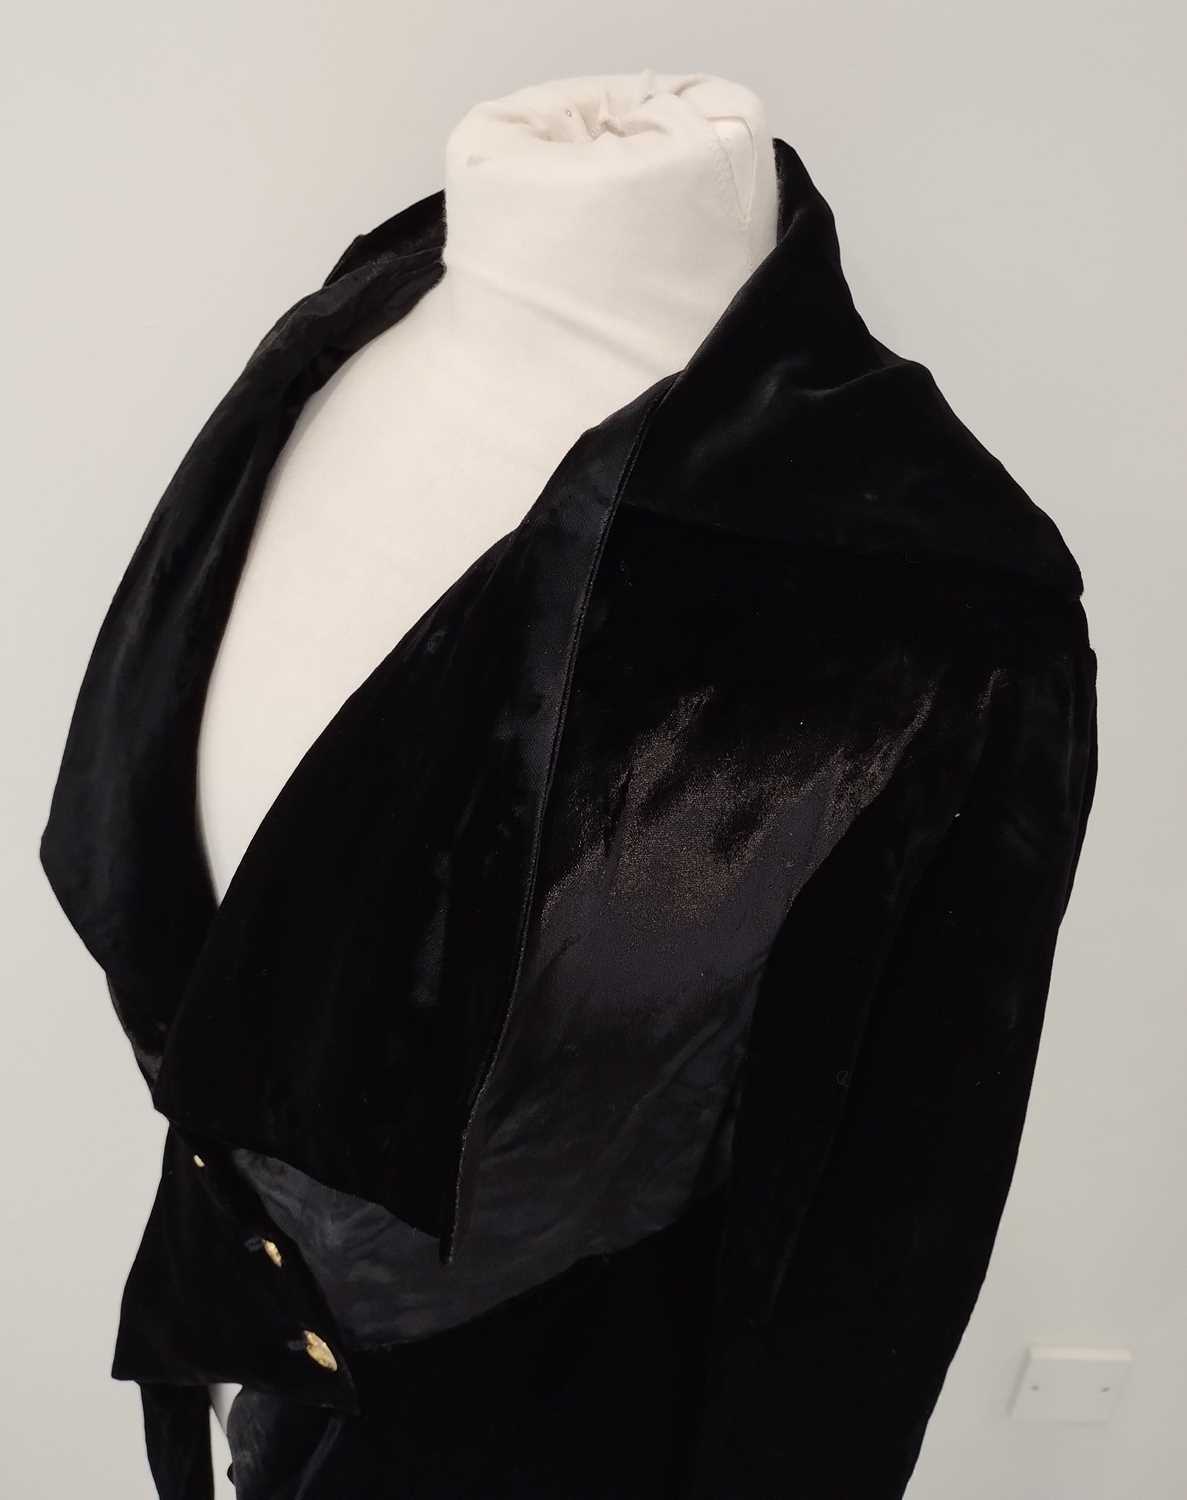 Vivienne Westwood London Black Pan Velvet Jacket, Spring/Summer Café Society Collection 1994 with - Image 10 of 27